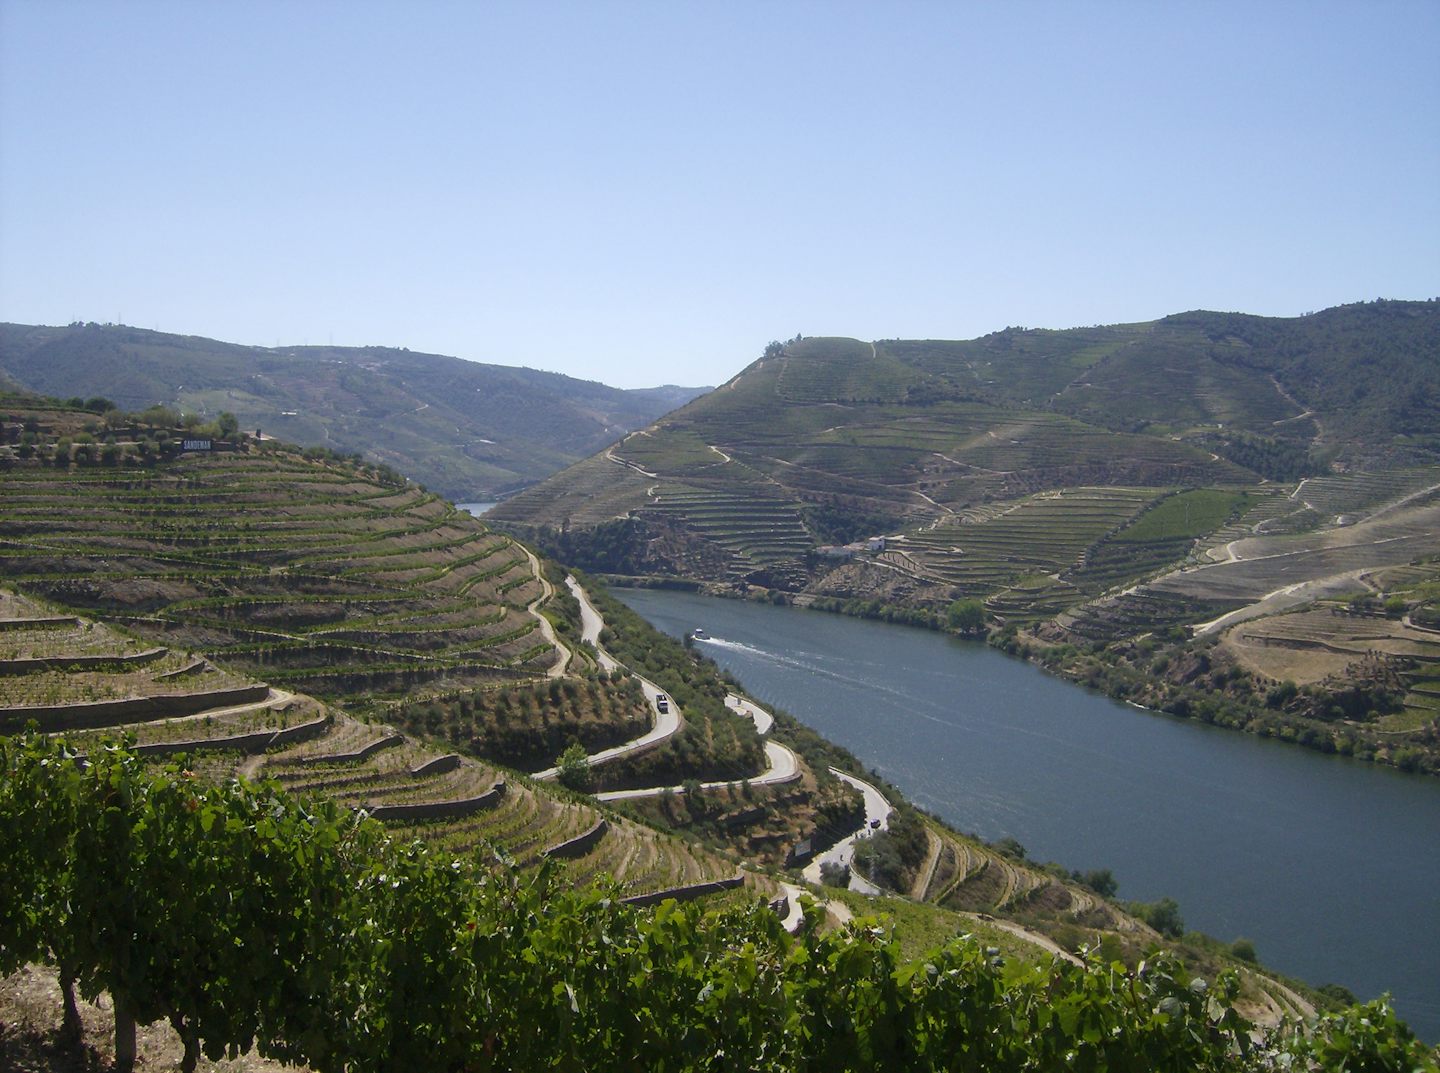 Douro RIver from Sandeman Winery, Pinhao